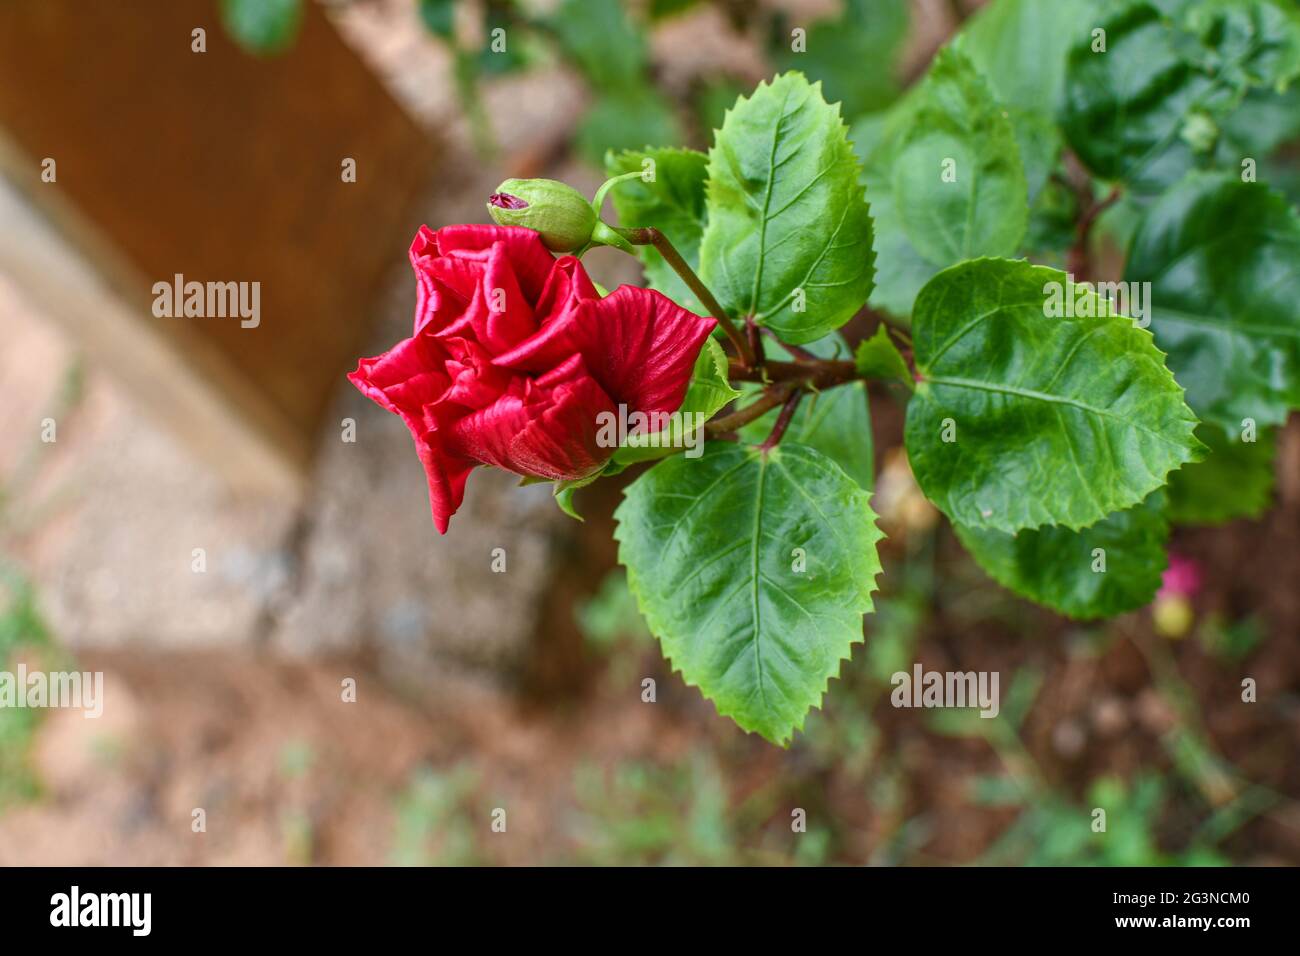 Red Chaina Rose Folding Petals With Bud, Green Leaves And Branches In Outdoor.  Looking Different Natural In Blur Background. Stock Photo